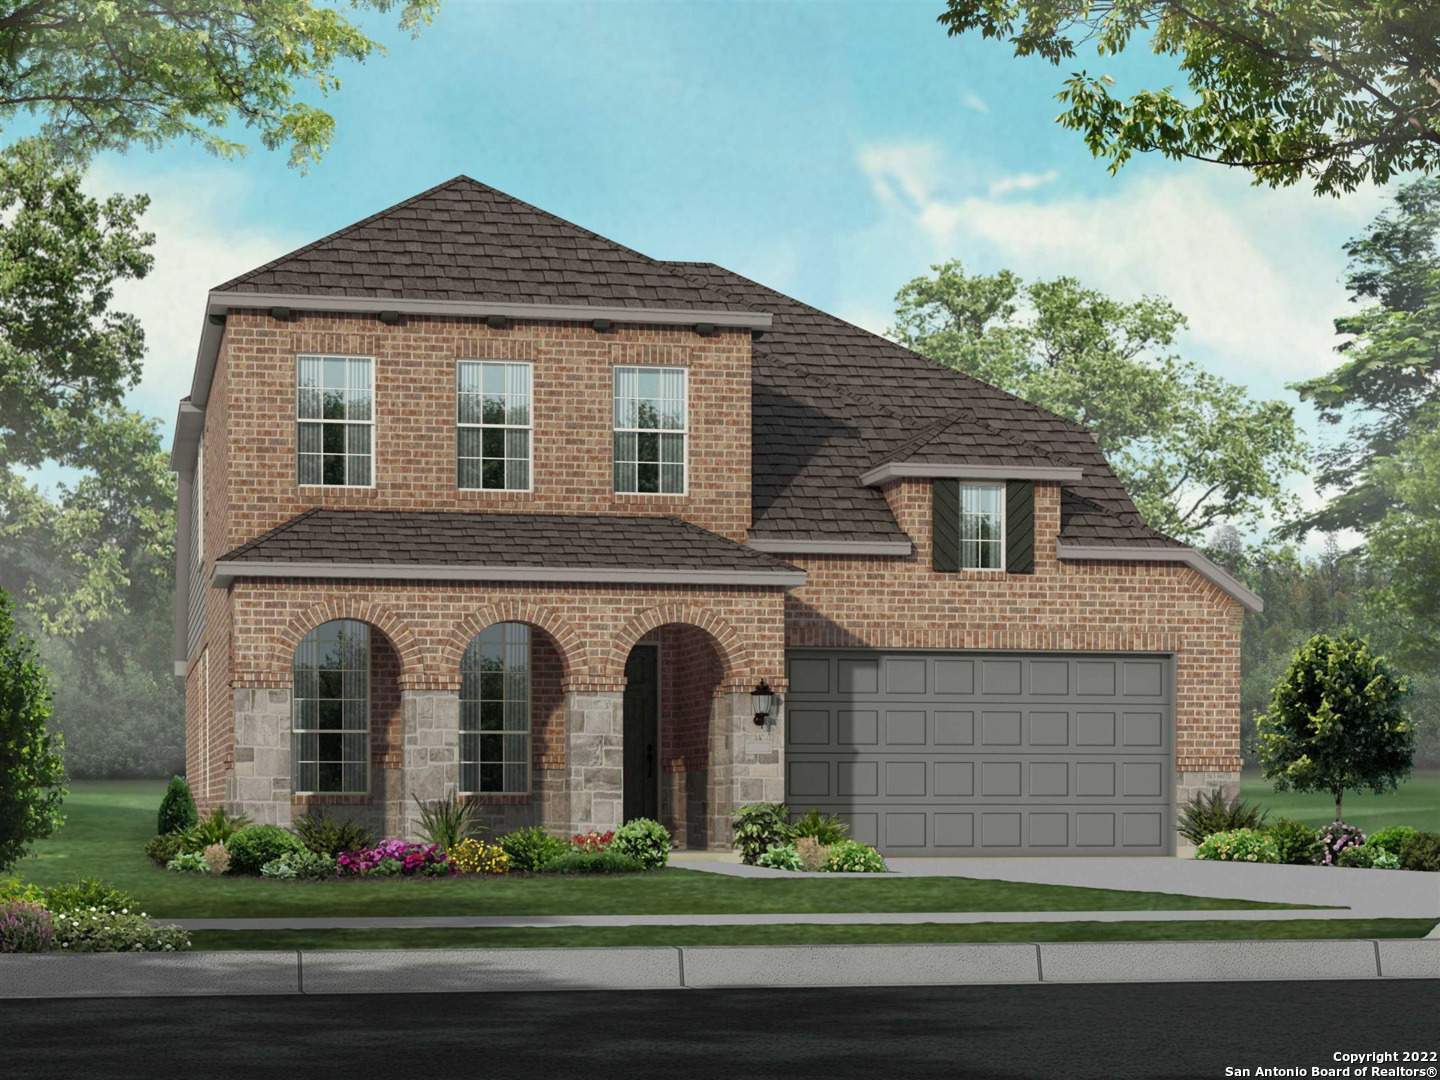 MLS# 1602908 - Built by Highland Homes - November completion! ~ This 2 story brick home is perfect for a family with the game and entertainment space upstairs! The home interior design palette is a neutral cream white with maple cabinets and porcelain tile floors in primary living areas.